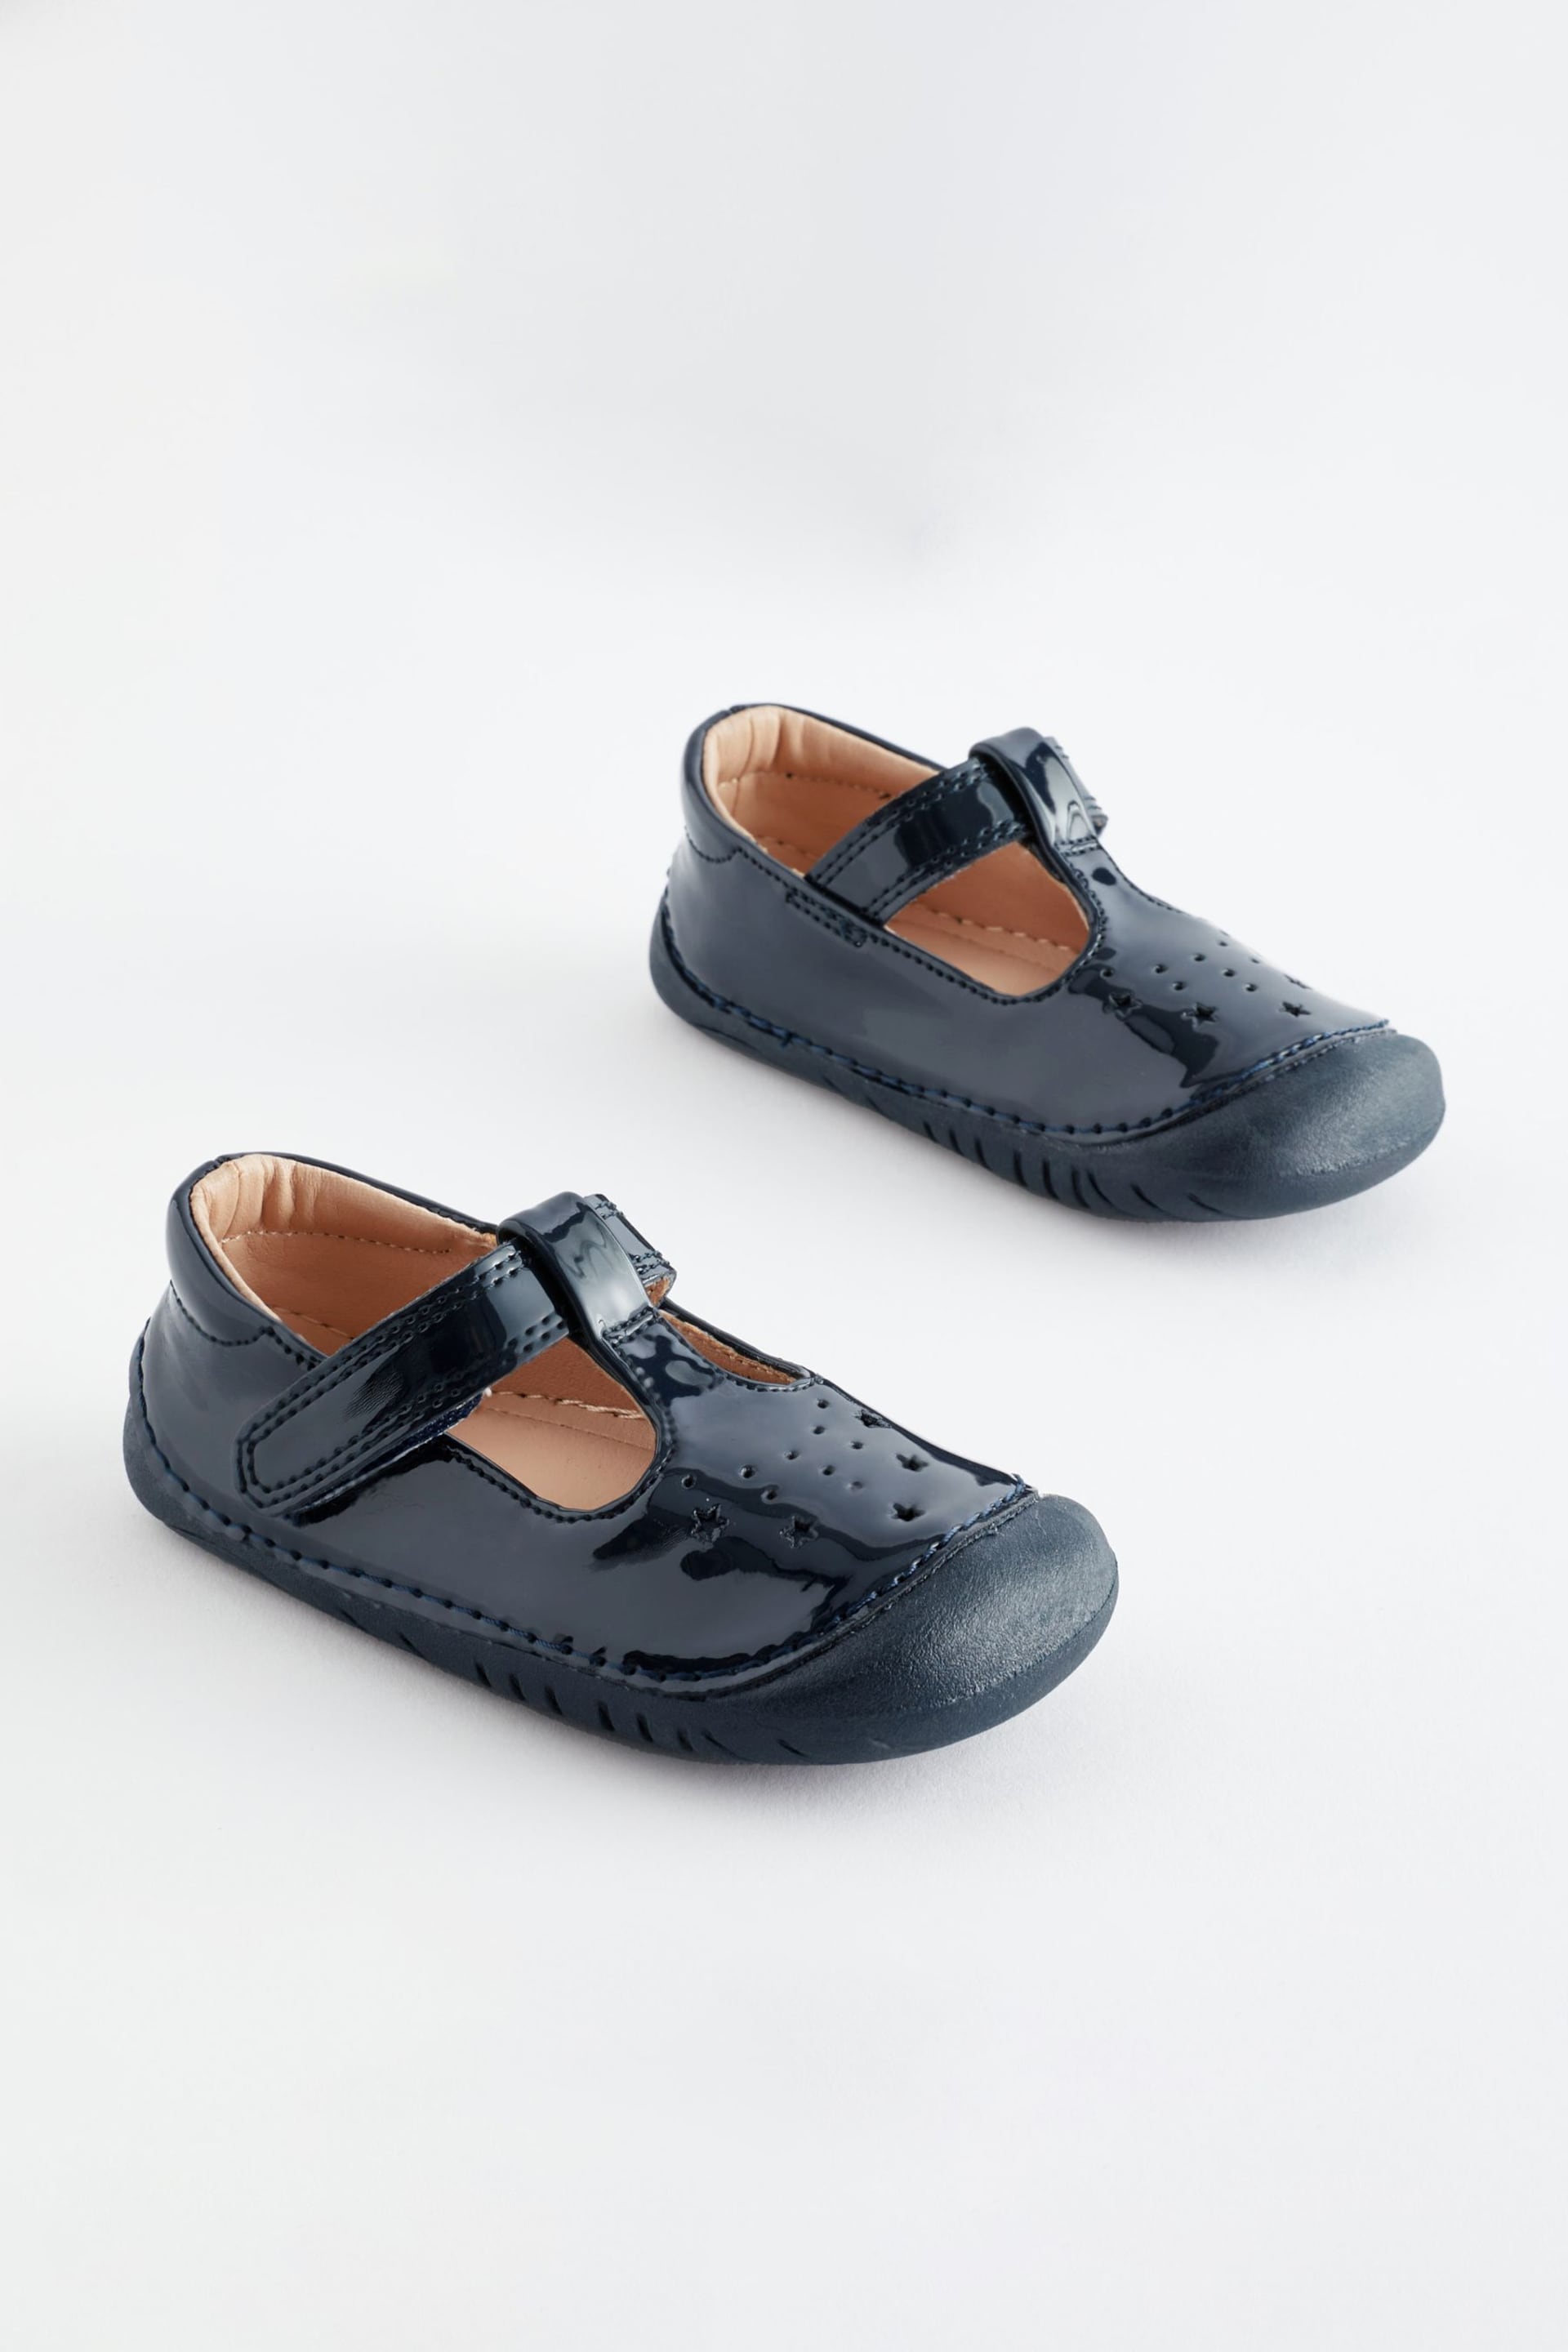 Navy Blue Patent Wide Fit (G) Crawler T-Bar Shoes - Image 1 of 5